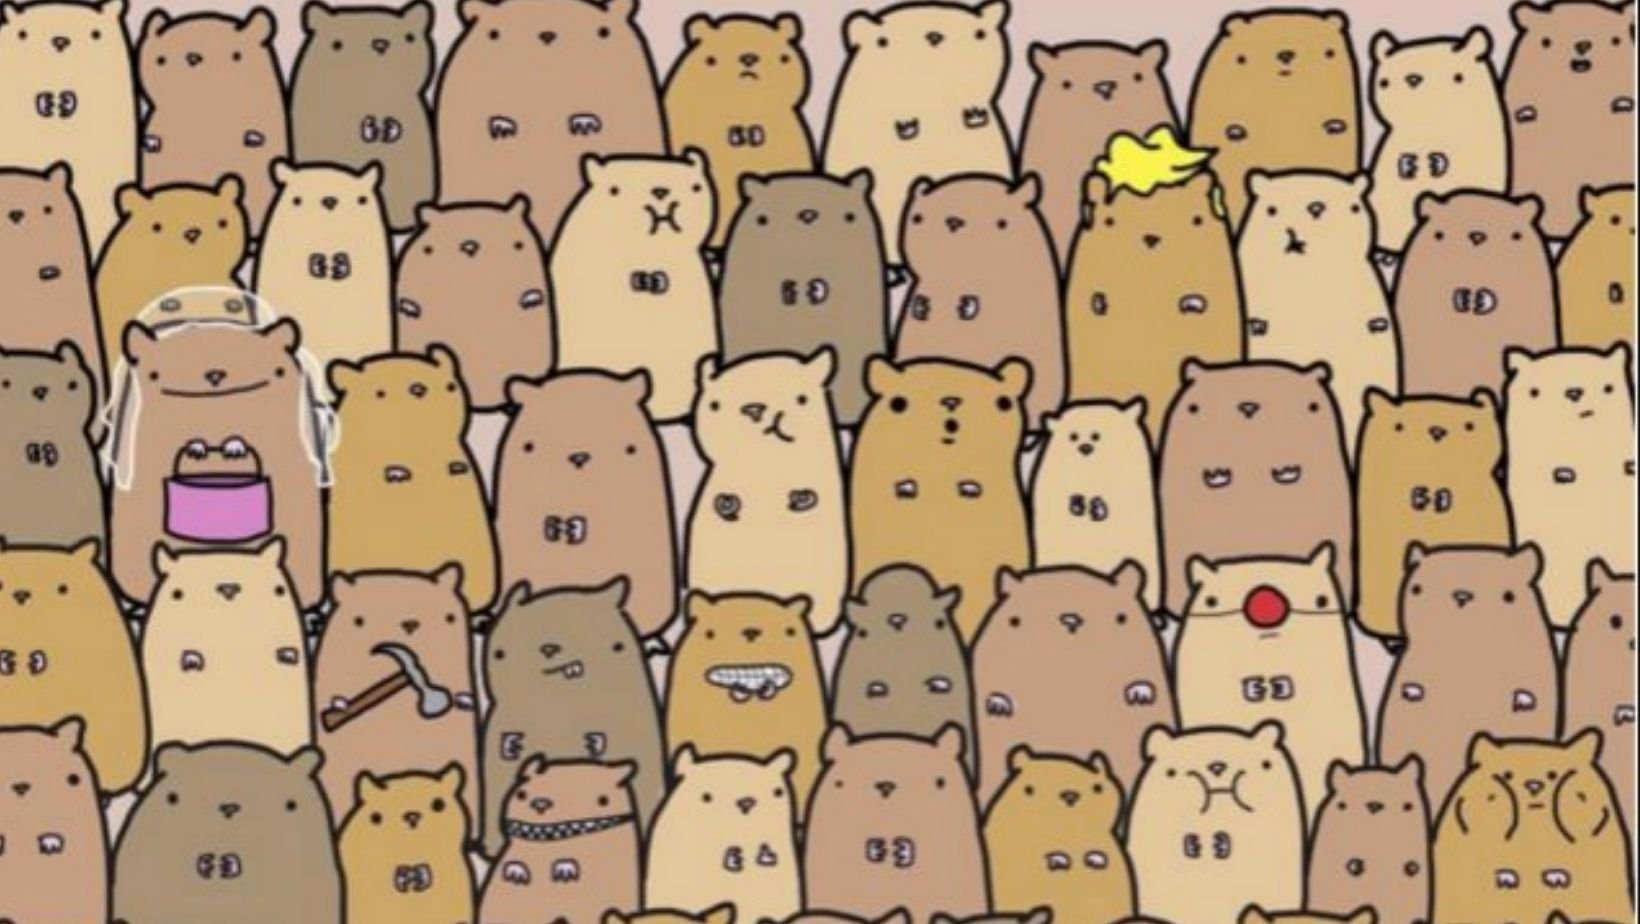 cover 7.jpg?resize=1200,630 - There's A Sneaky Potato Hiding In These Adorable Hamsters, Can You Find It?